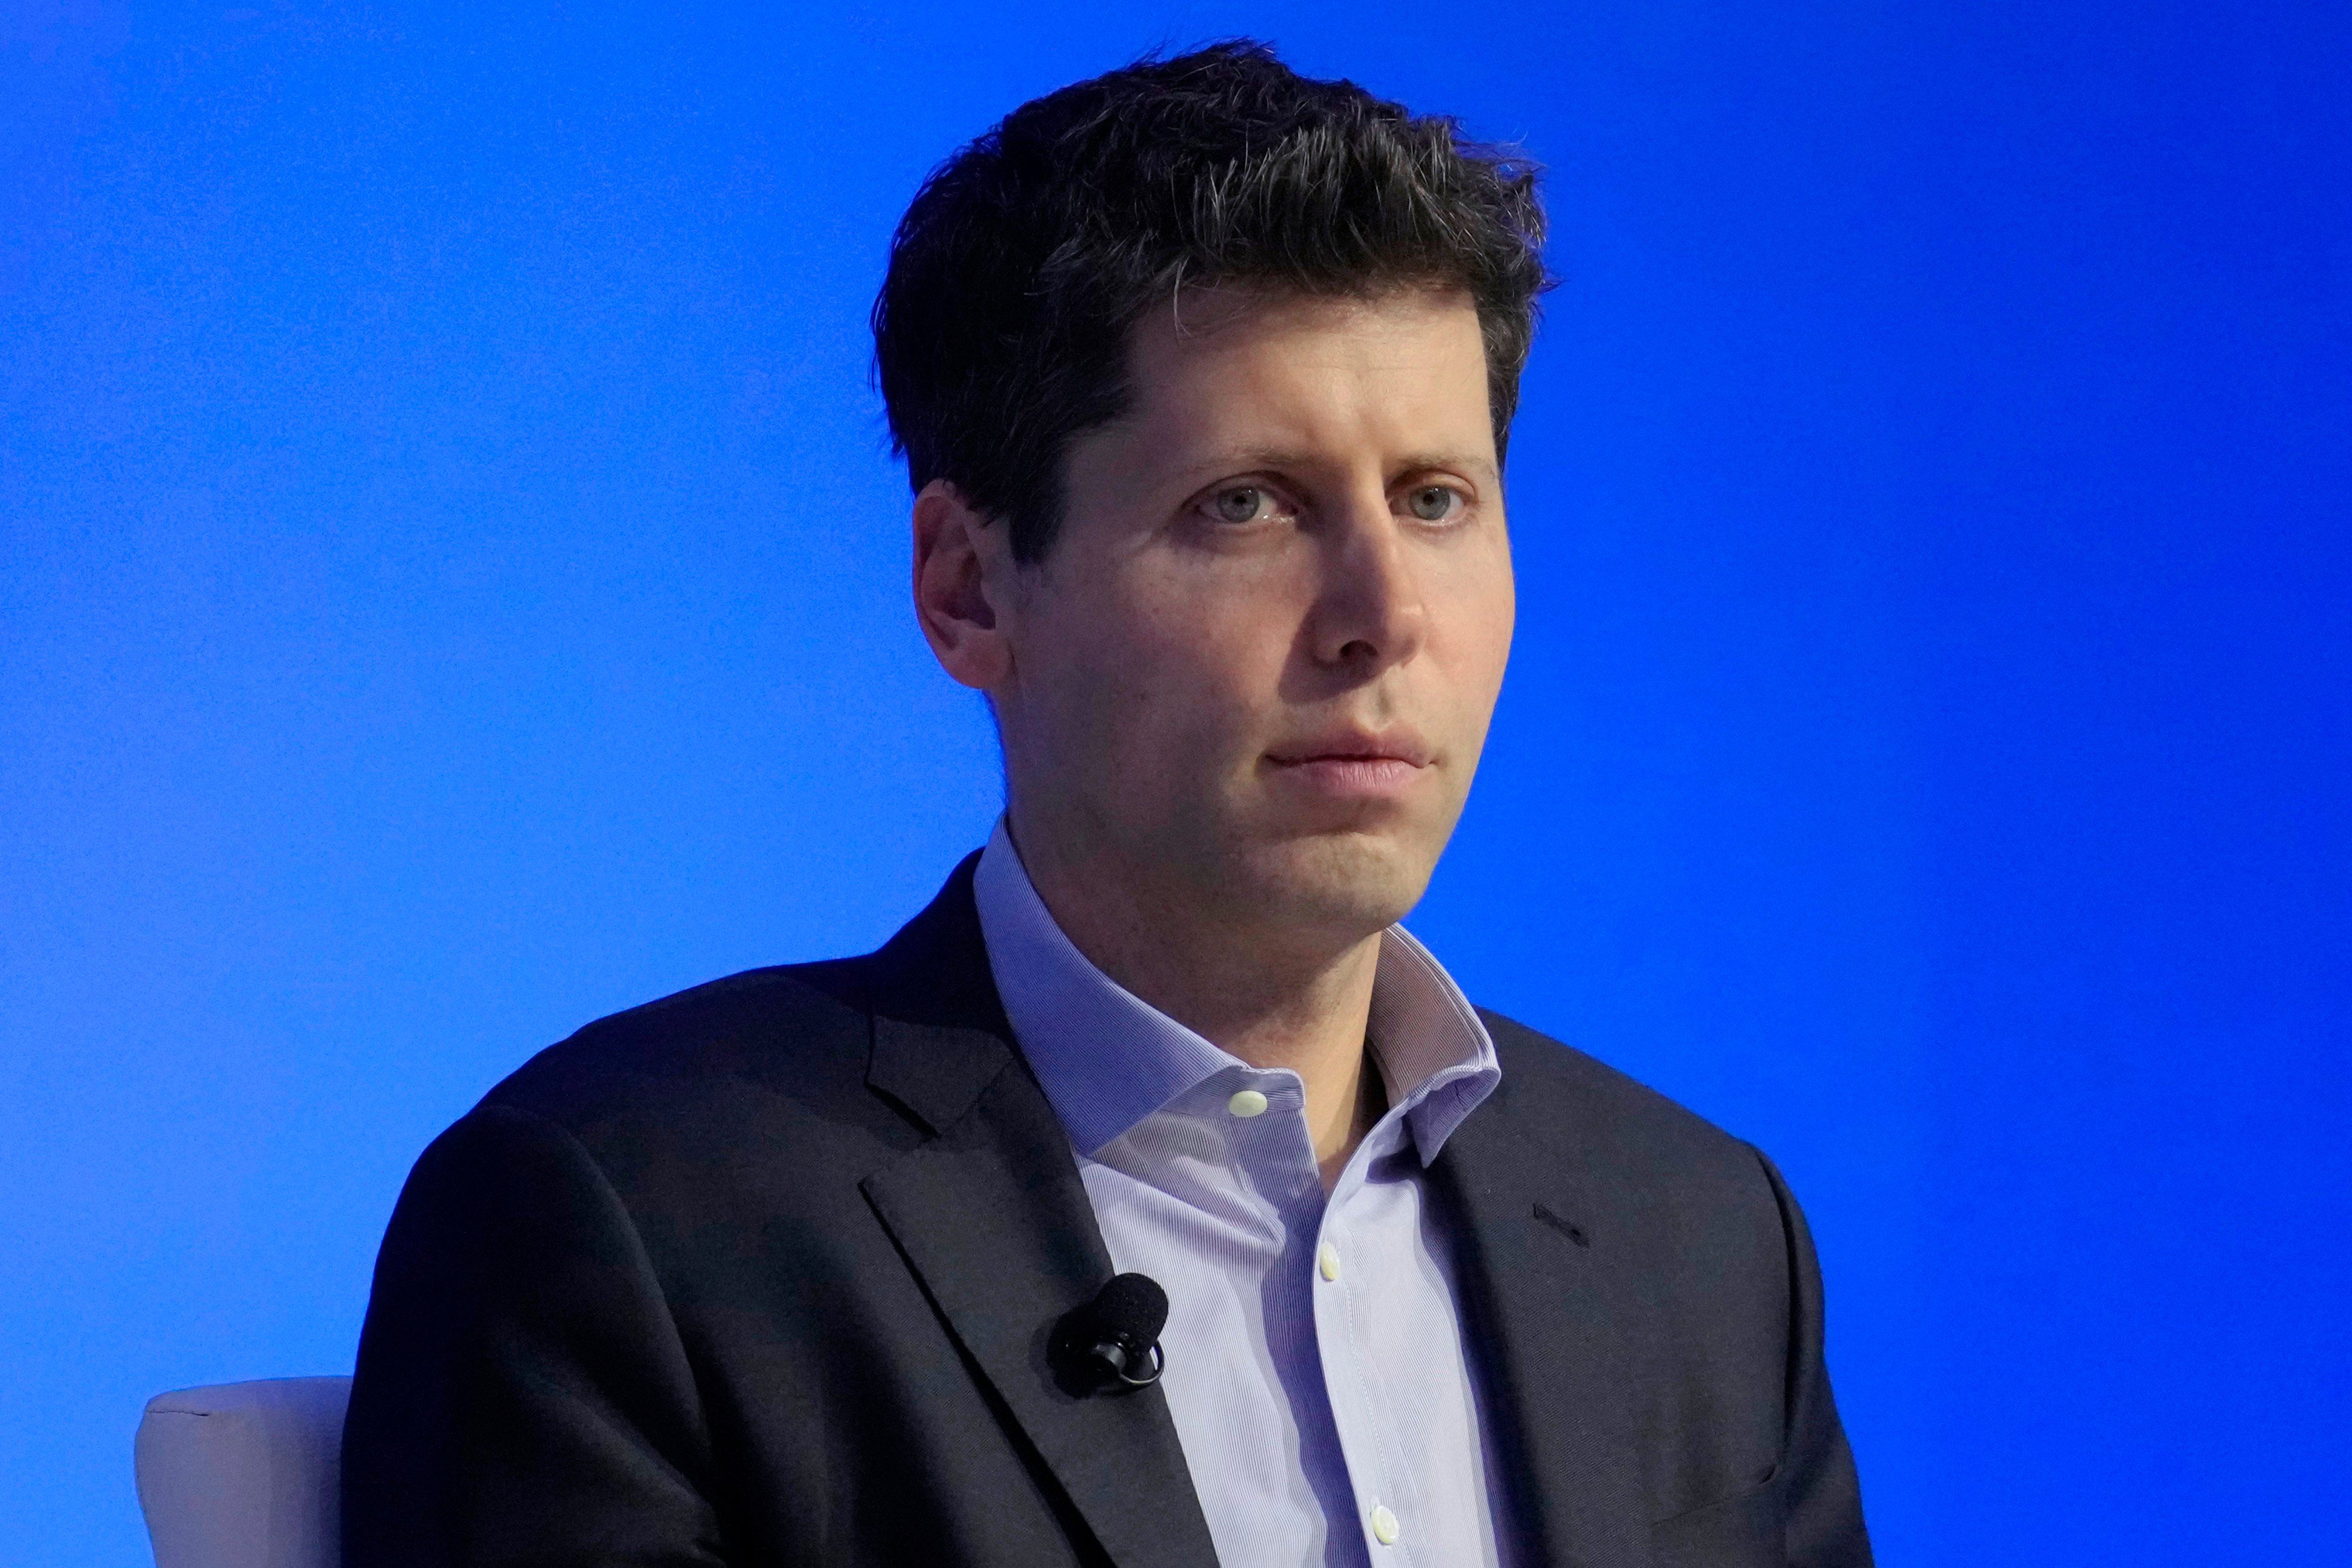 OpenAI CEO Sam Altman takes part in a discussion during the Asia-Pacific Economic Cooperation CEO Summit in San Francisco in November. Photo: AP